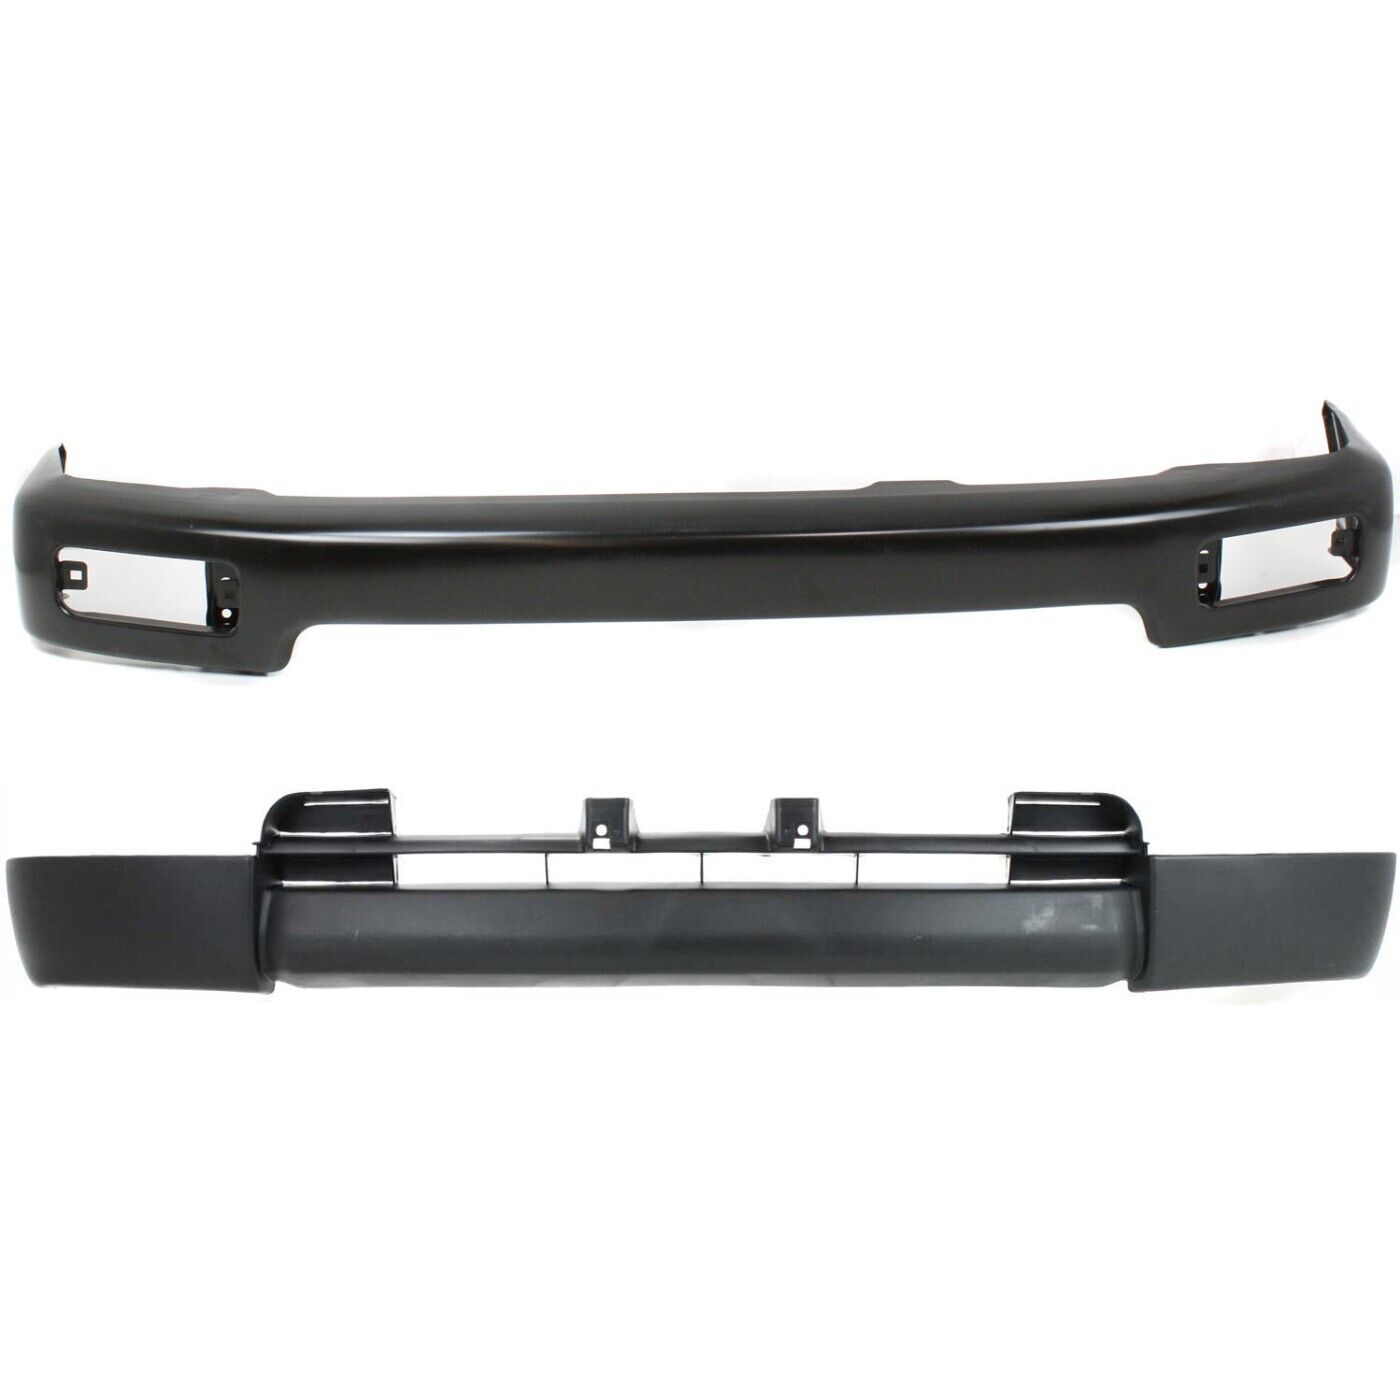 Bumper Kit For 1996-1998 Toyota 4Runner With License Plate Provision Front